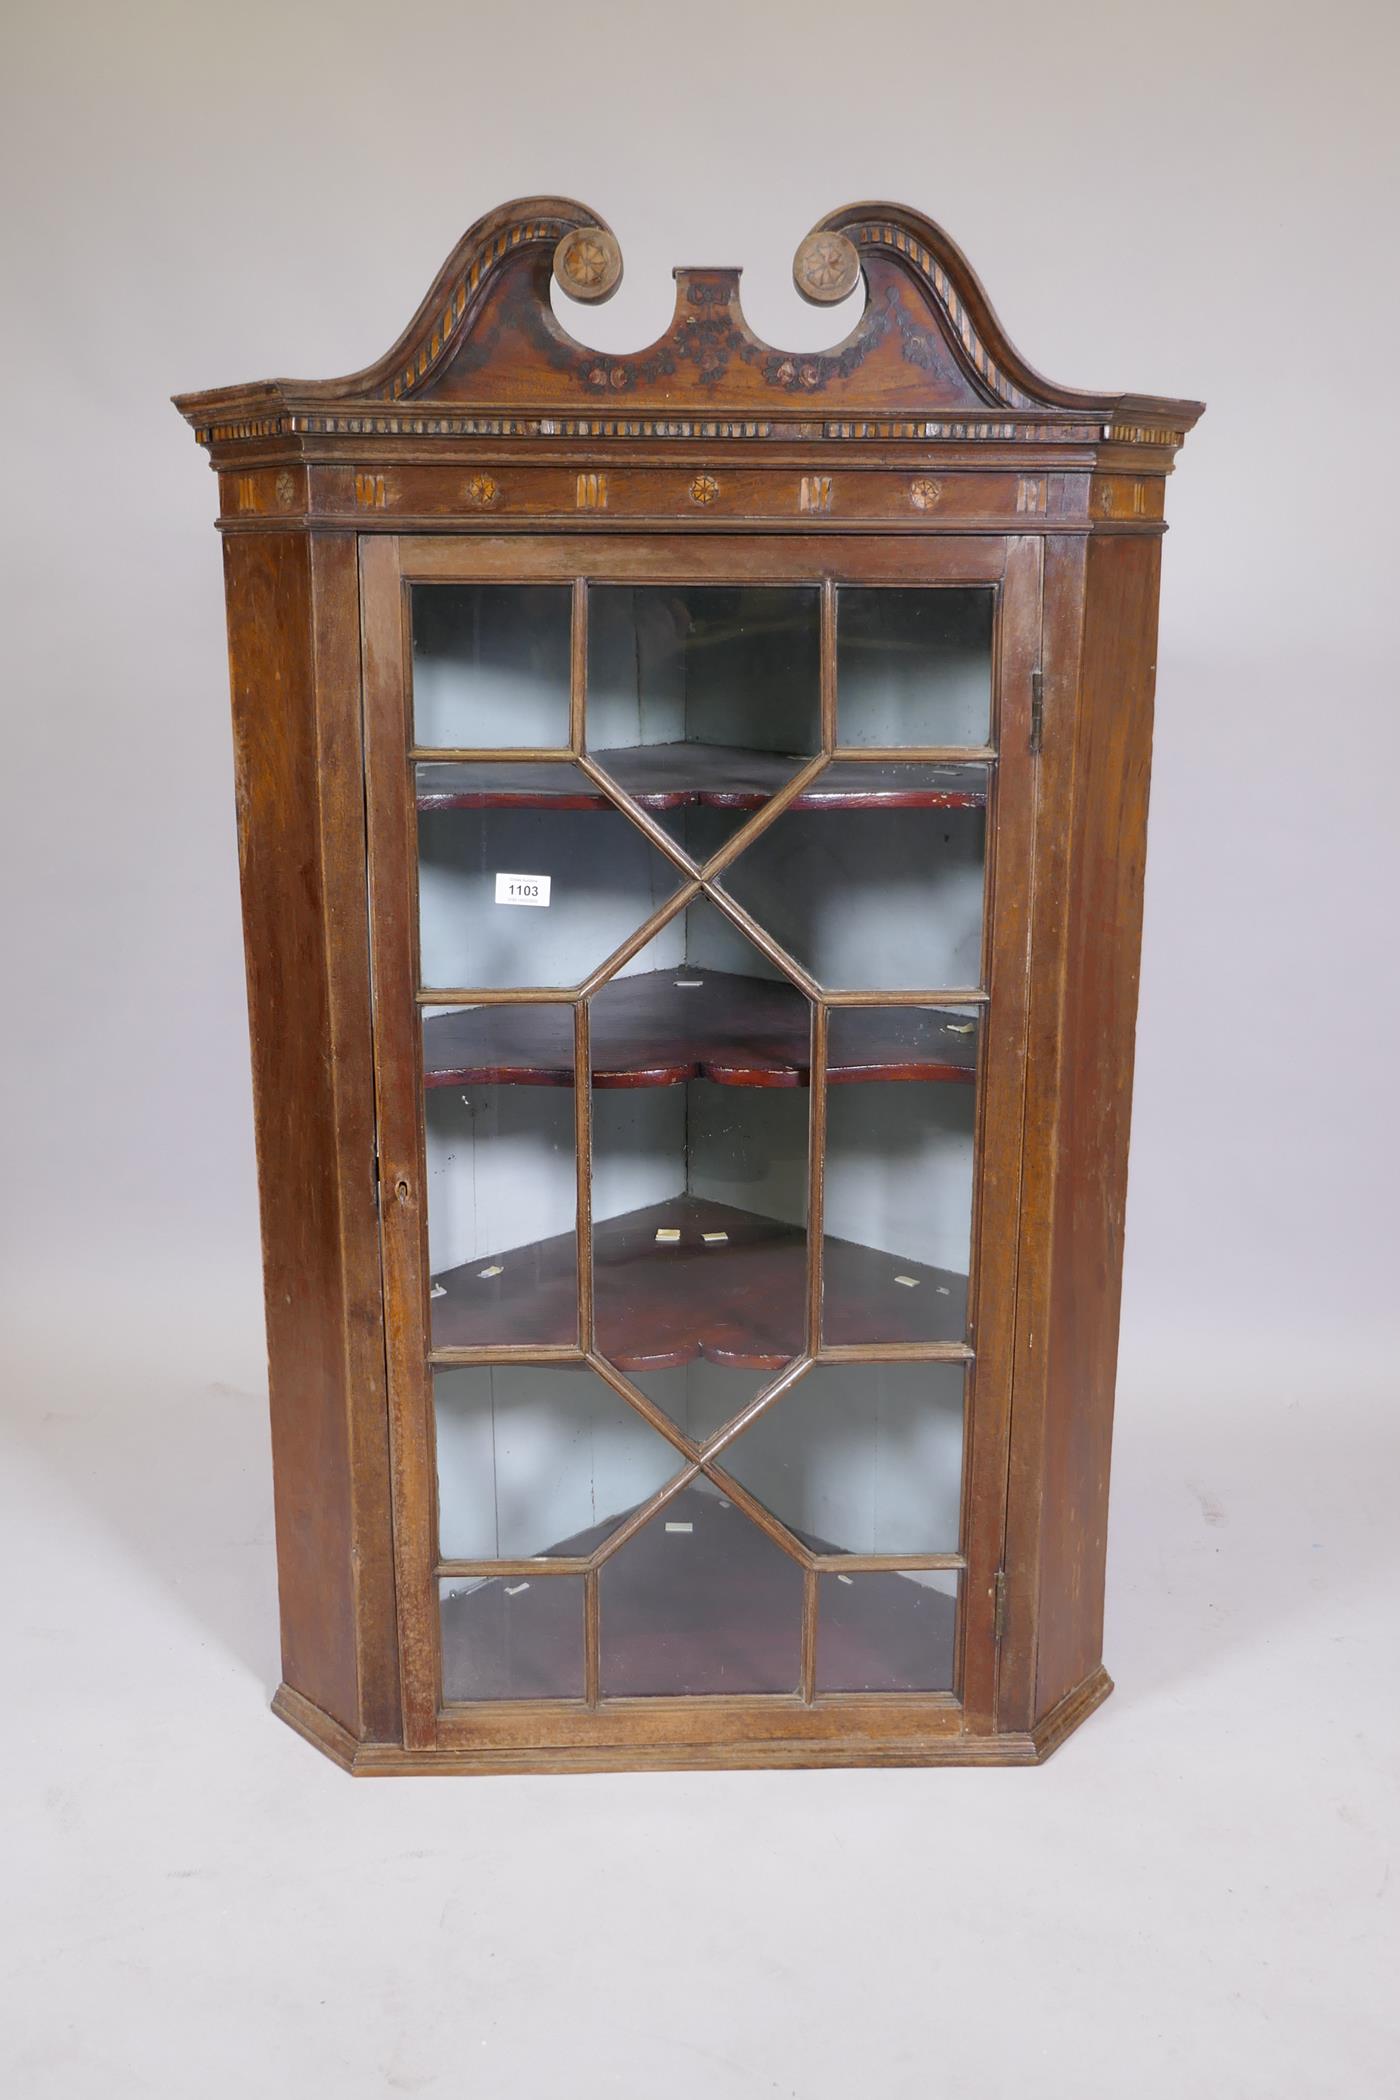 A C19th mahogany hanging corner cupboard with an astragal glazed door, with painted and inlaid